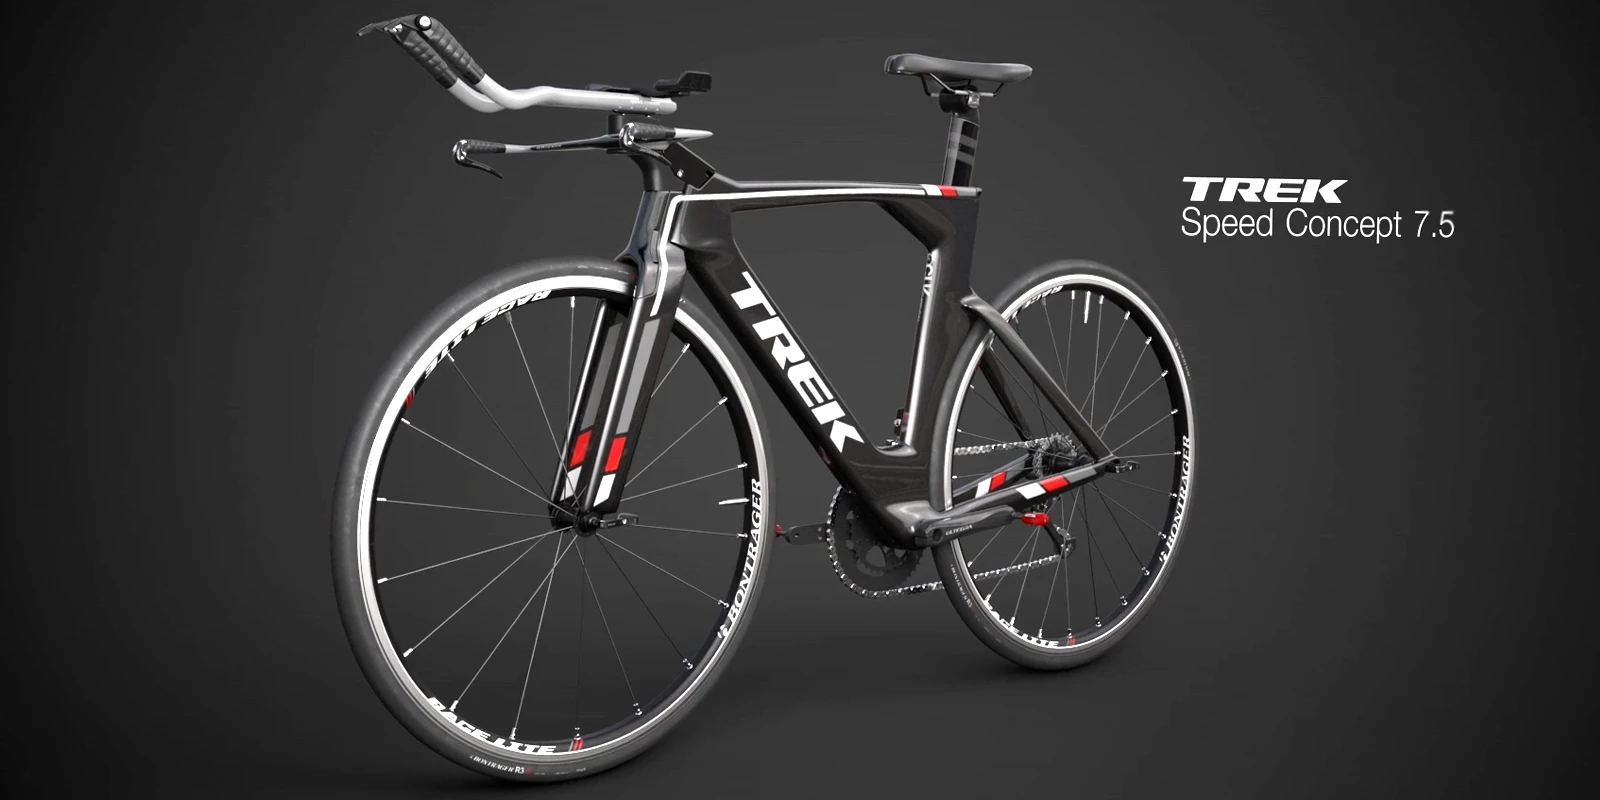 This captivating animation unveils a new Trek bicycle. Sleek design, advanced tech & innovative features come alive, showcasing superior performance & precision engineering.